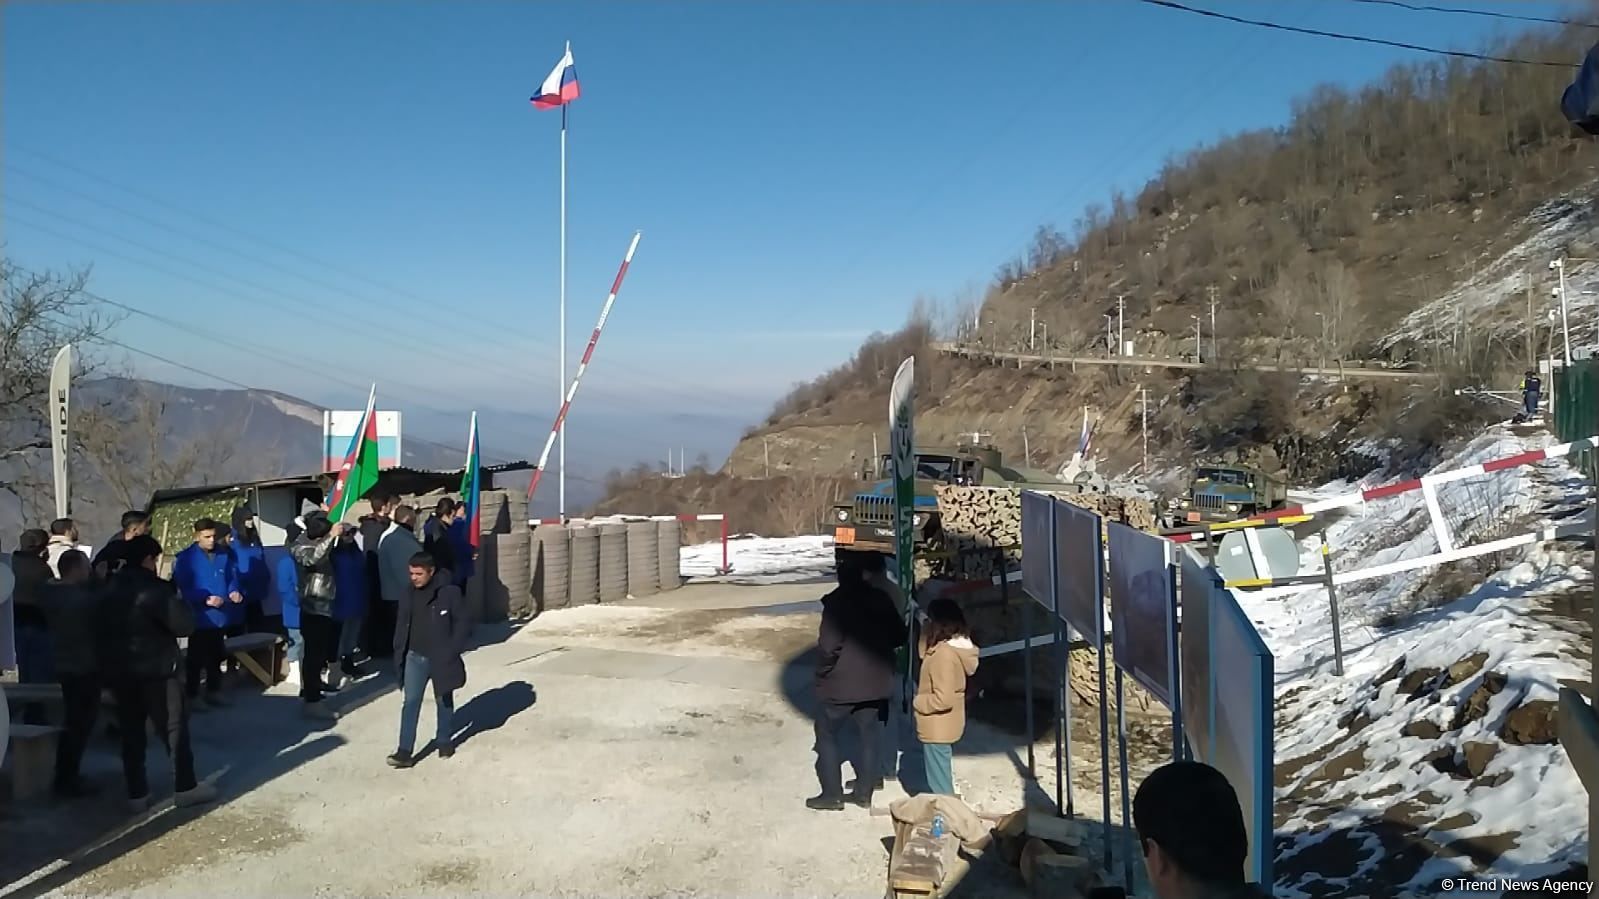 Foreign media reps visit venue of ongoing protests of eco-activists in Karabakh